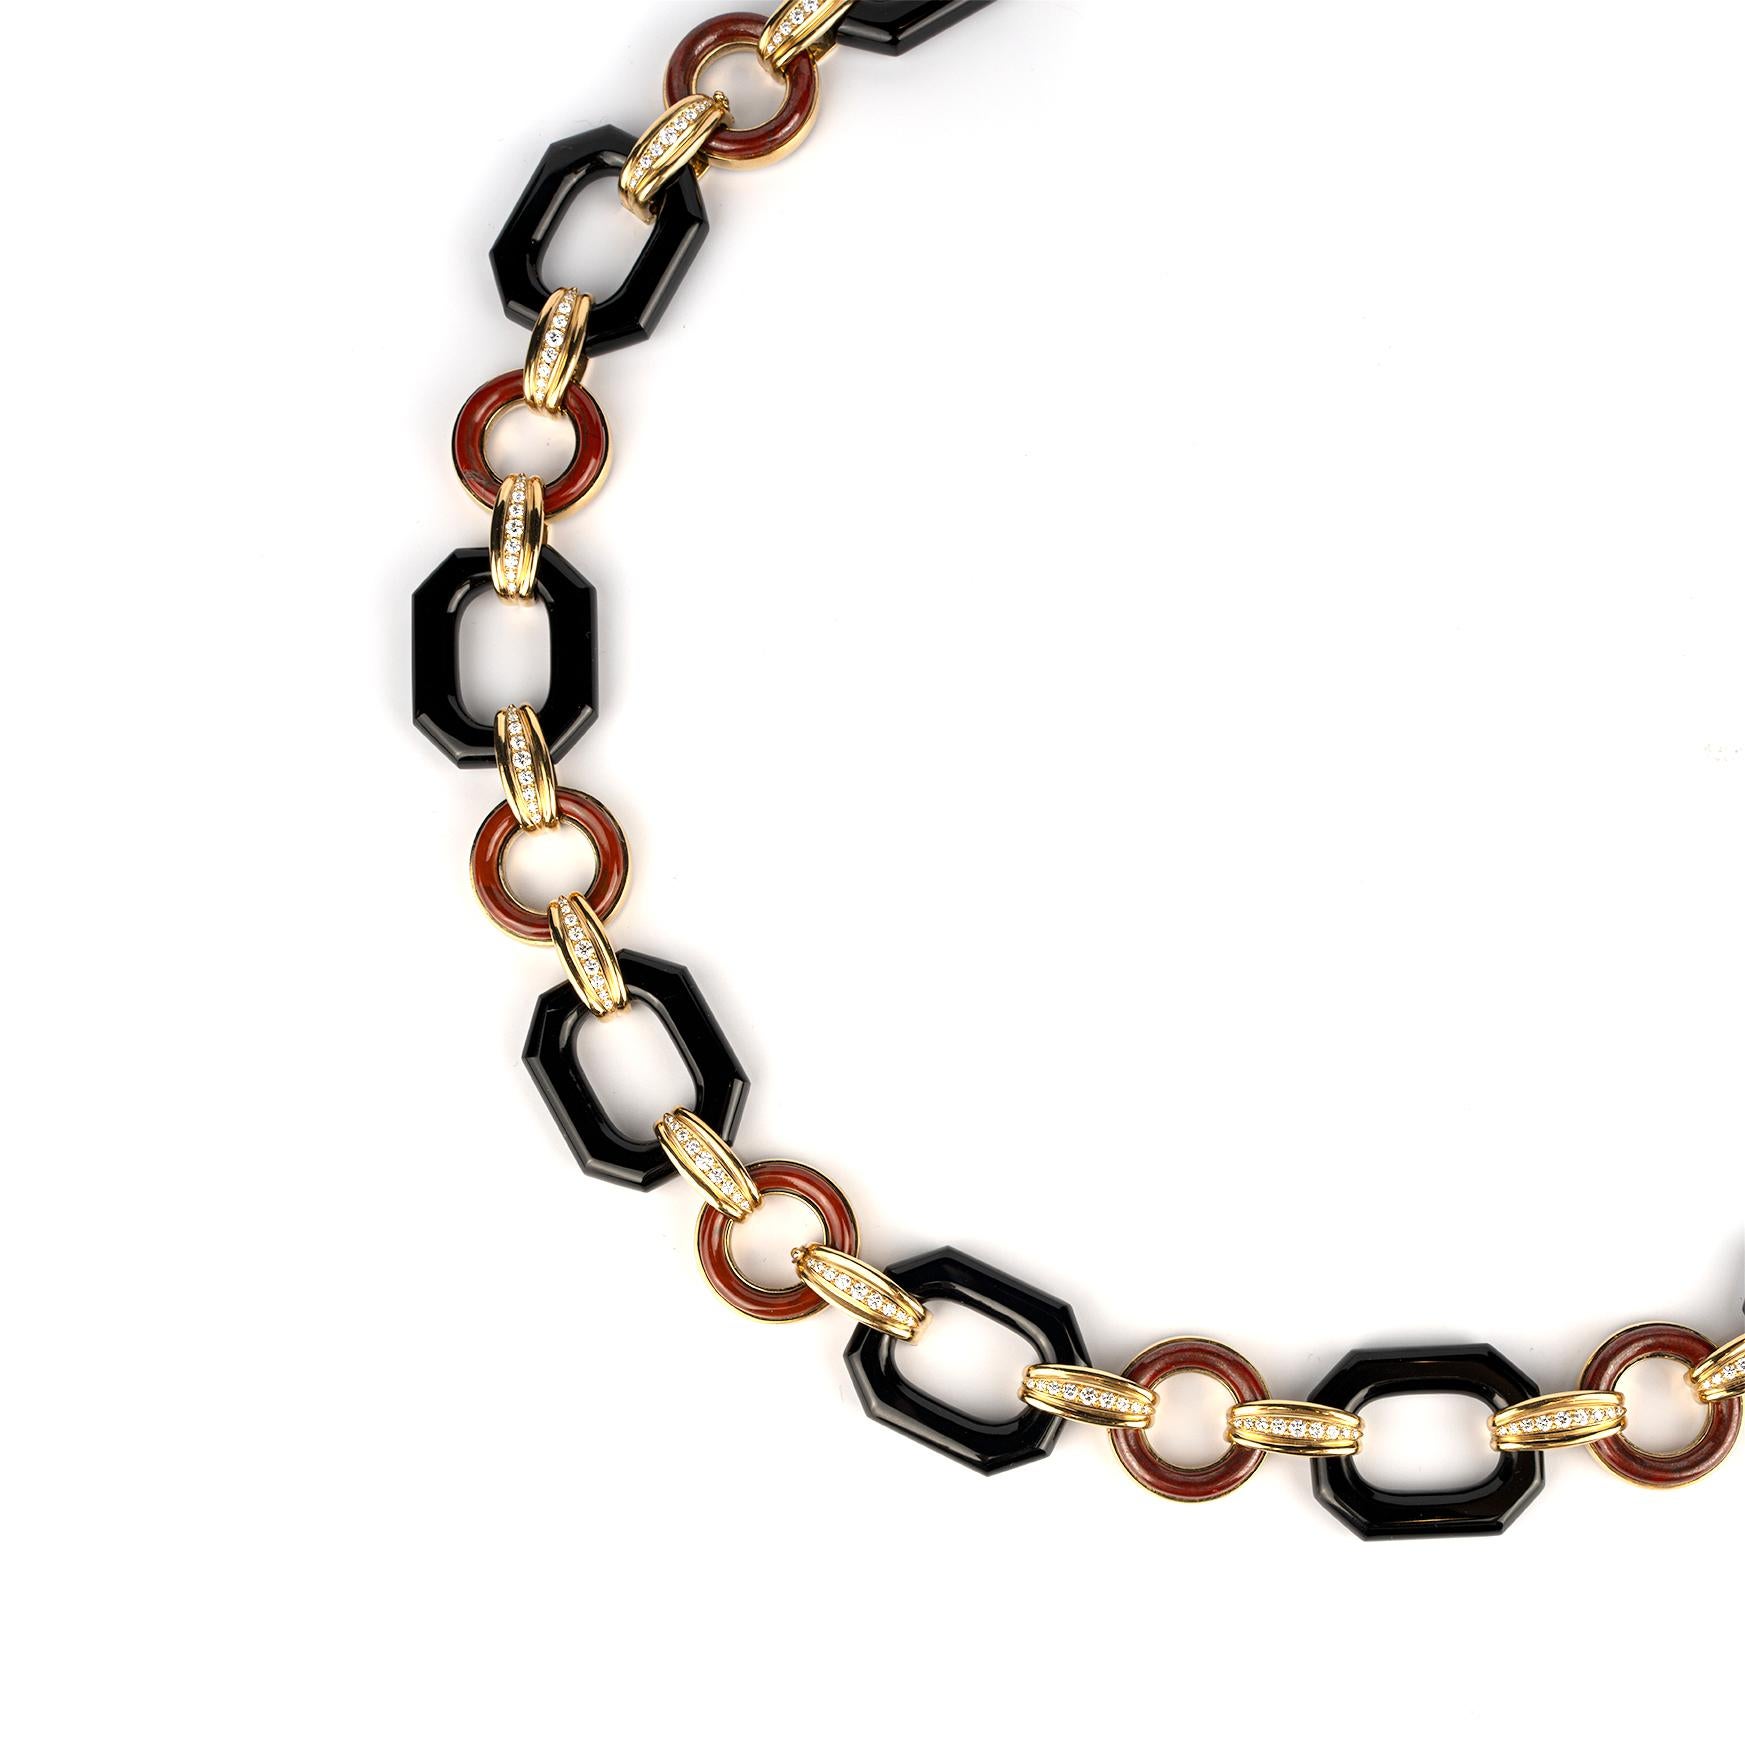 A chic and beautiful long necklace of geometrical design with octagonal shaped onyx, circular jasper, connected by 18k yellow gold and diamond links. Made in Italy, circa 1980.